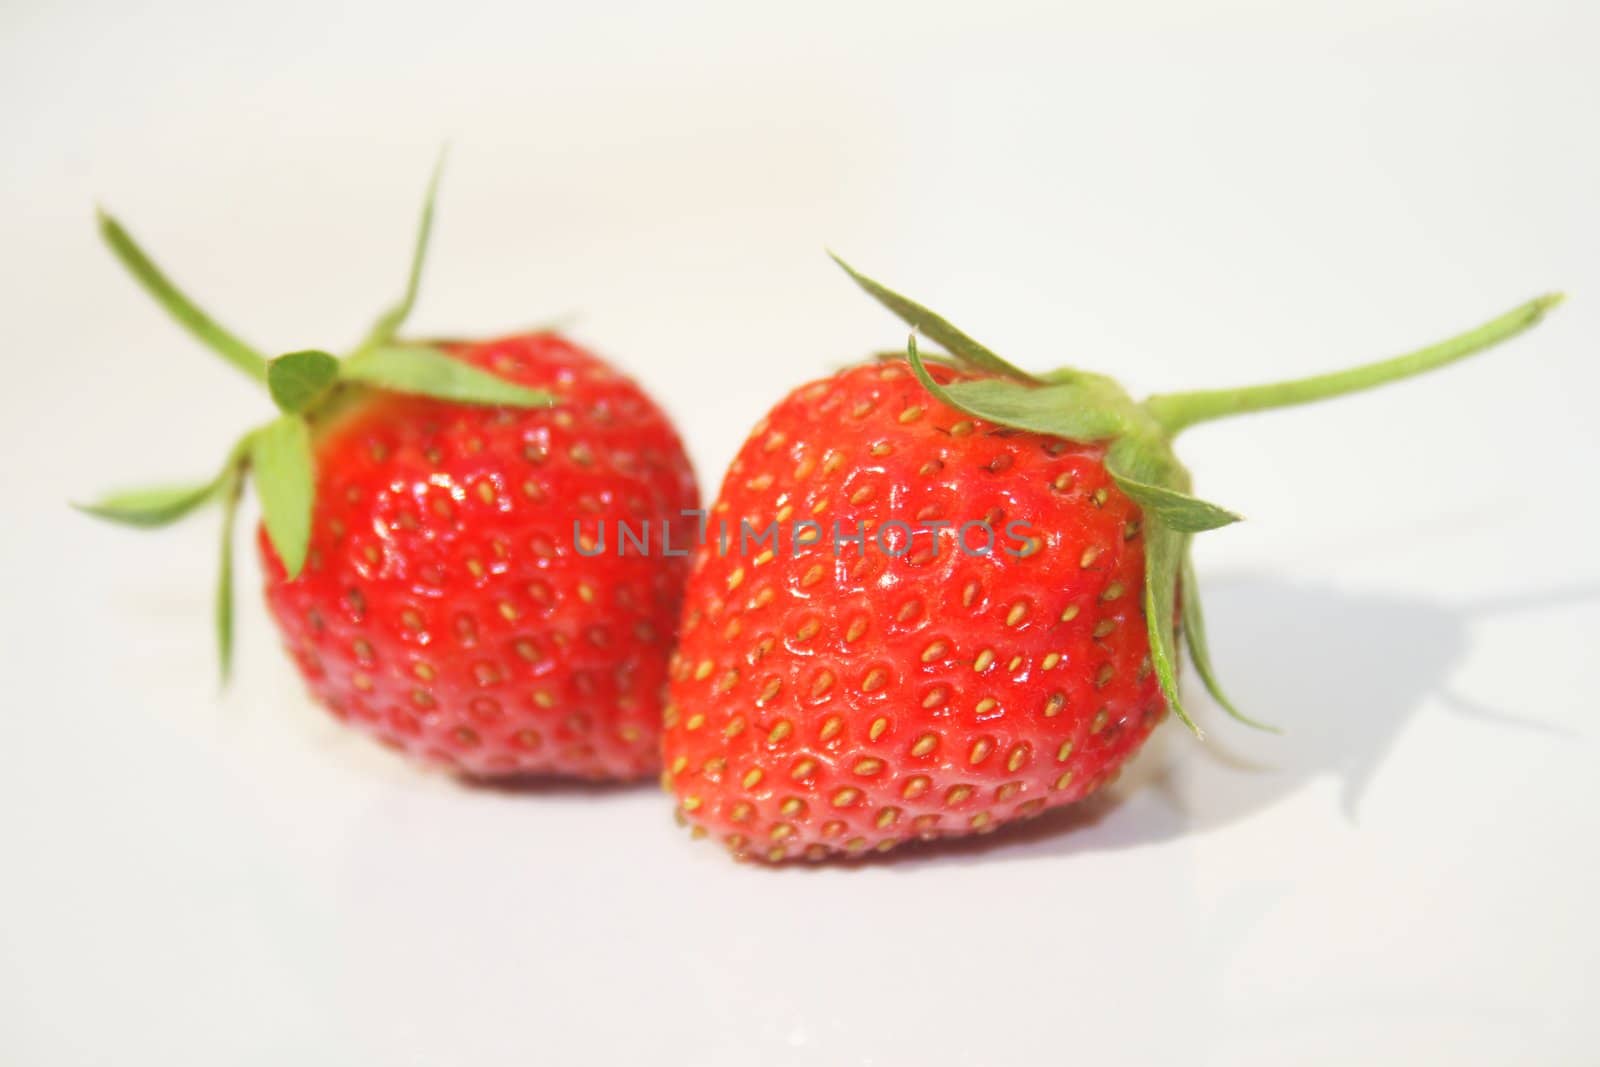 Two wild strawberries against white background